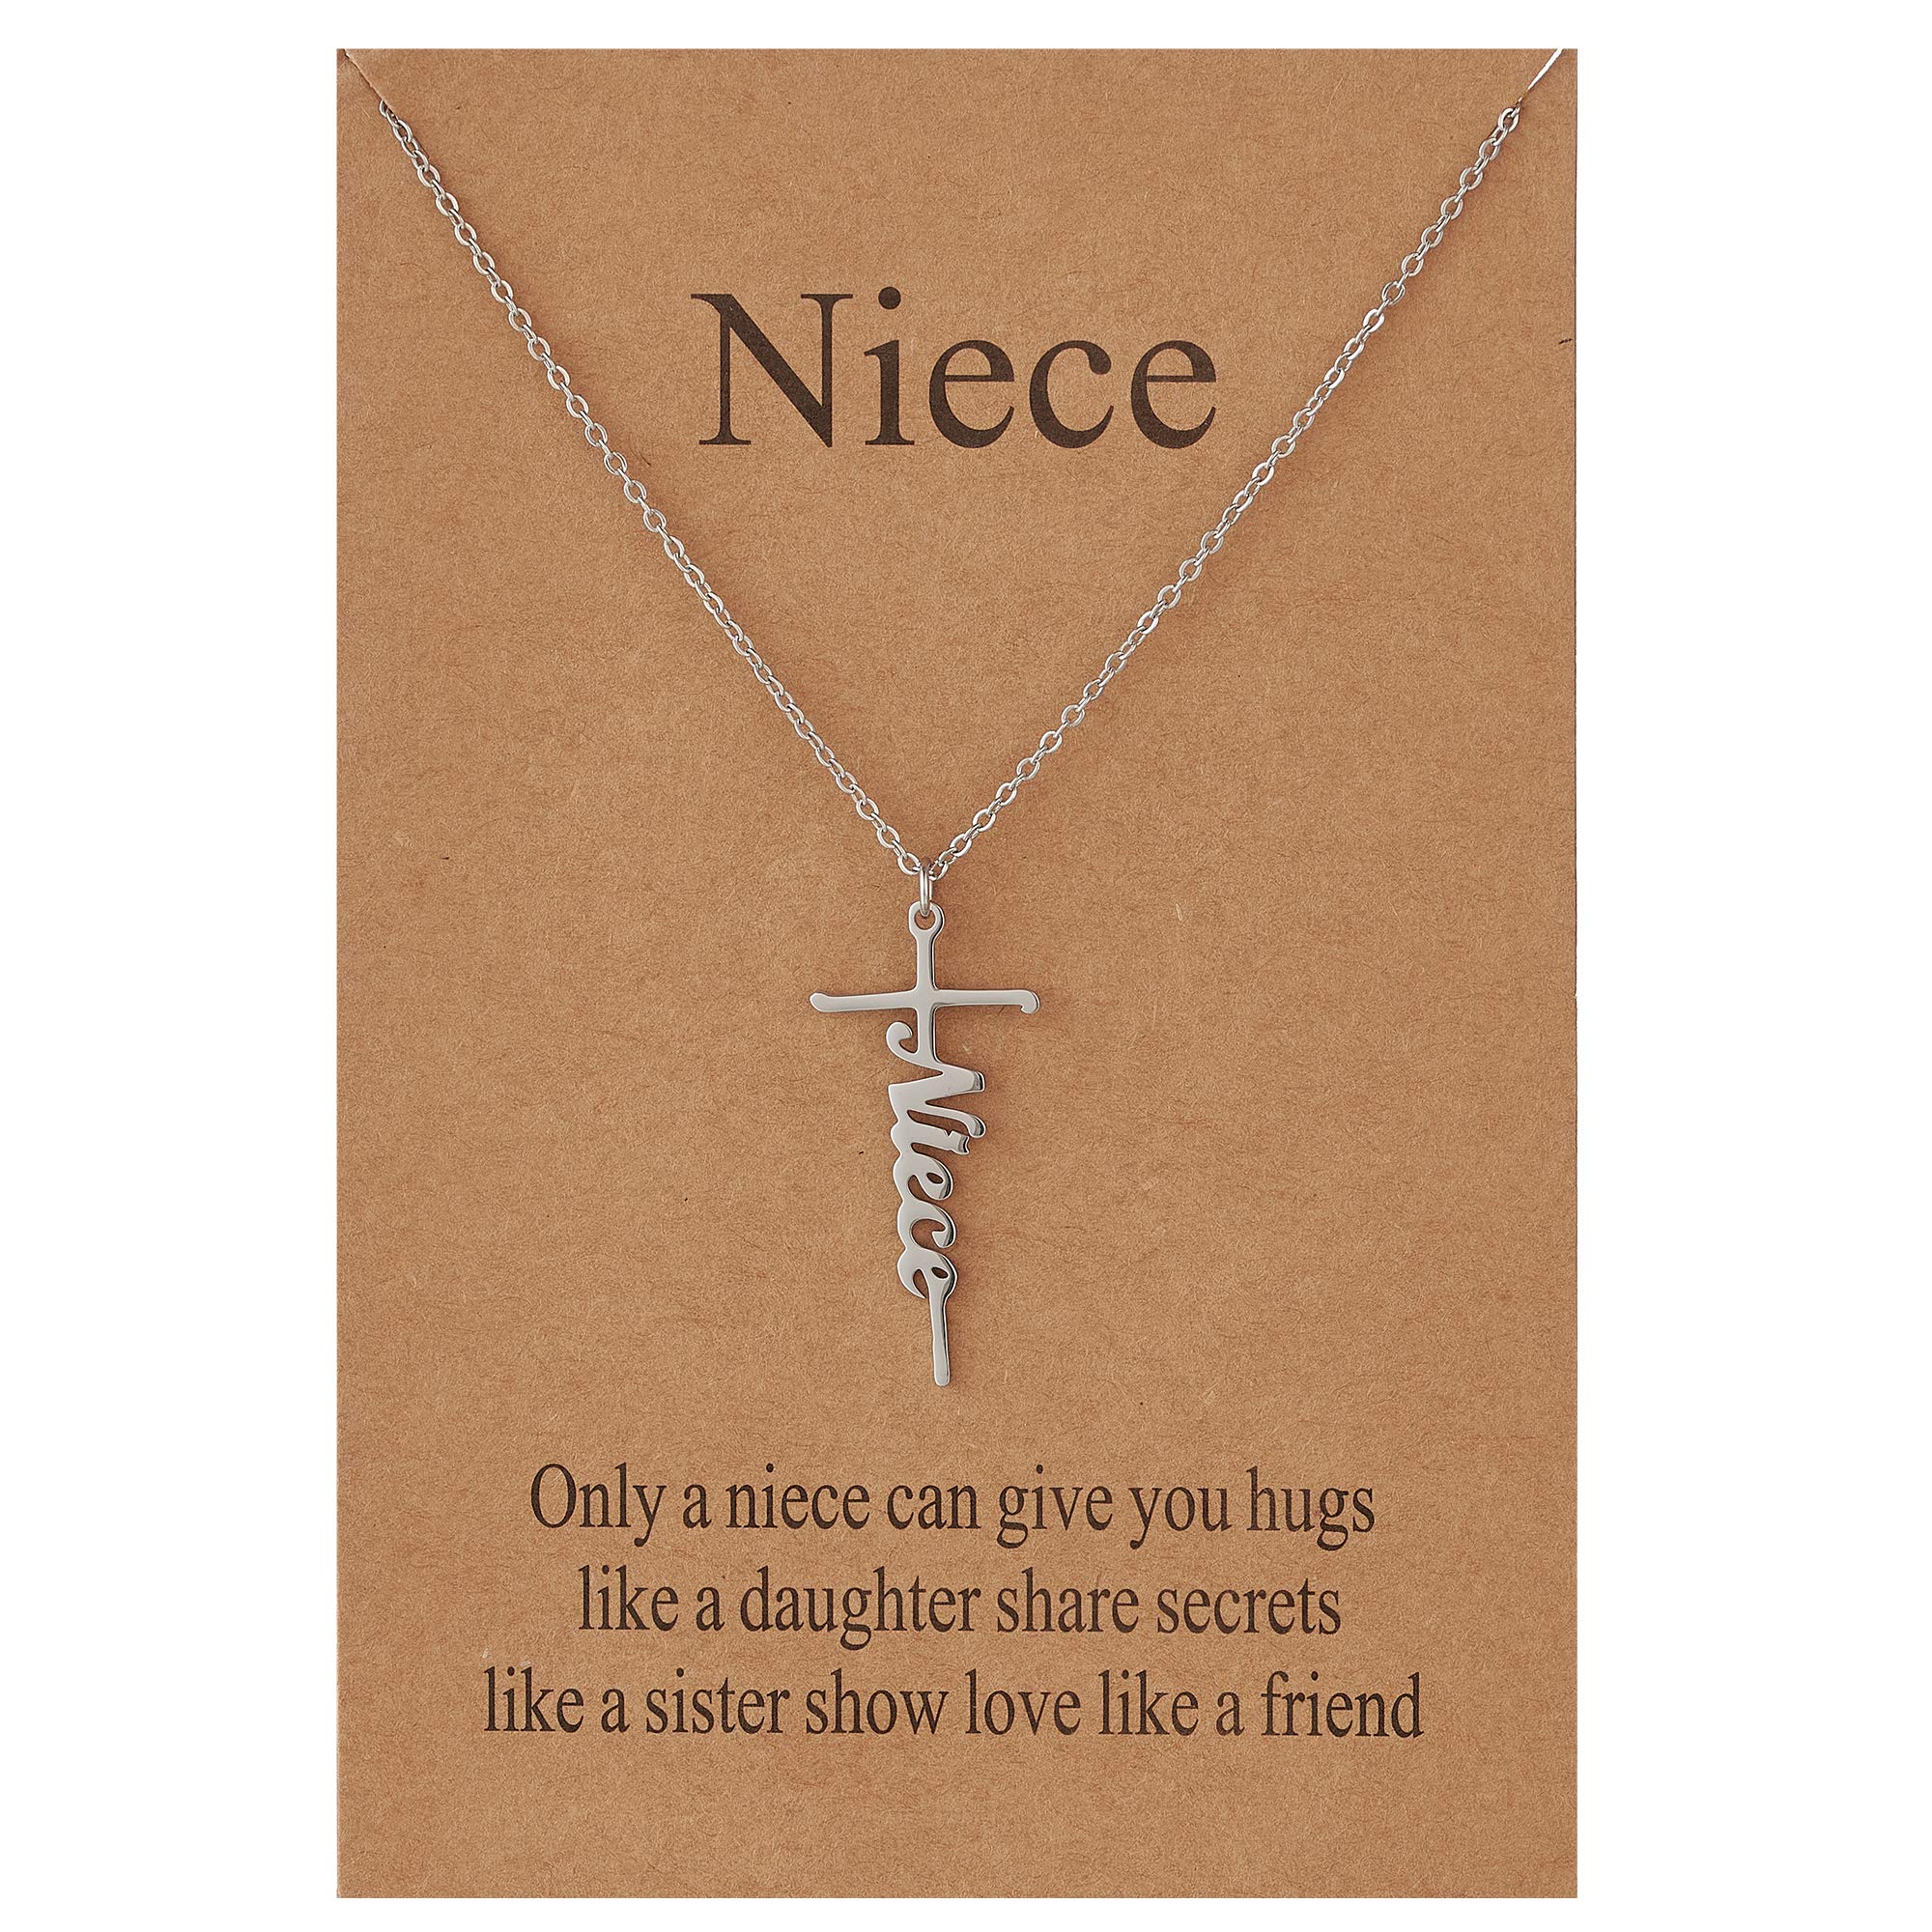 Lcherry Niece cross Pendant Necklace Stainless Steel cross Necklace Religious Jewelry for Women